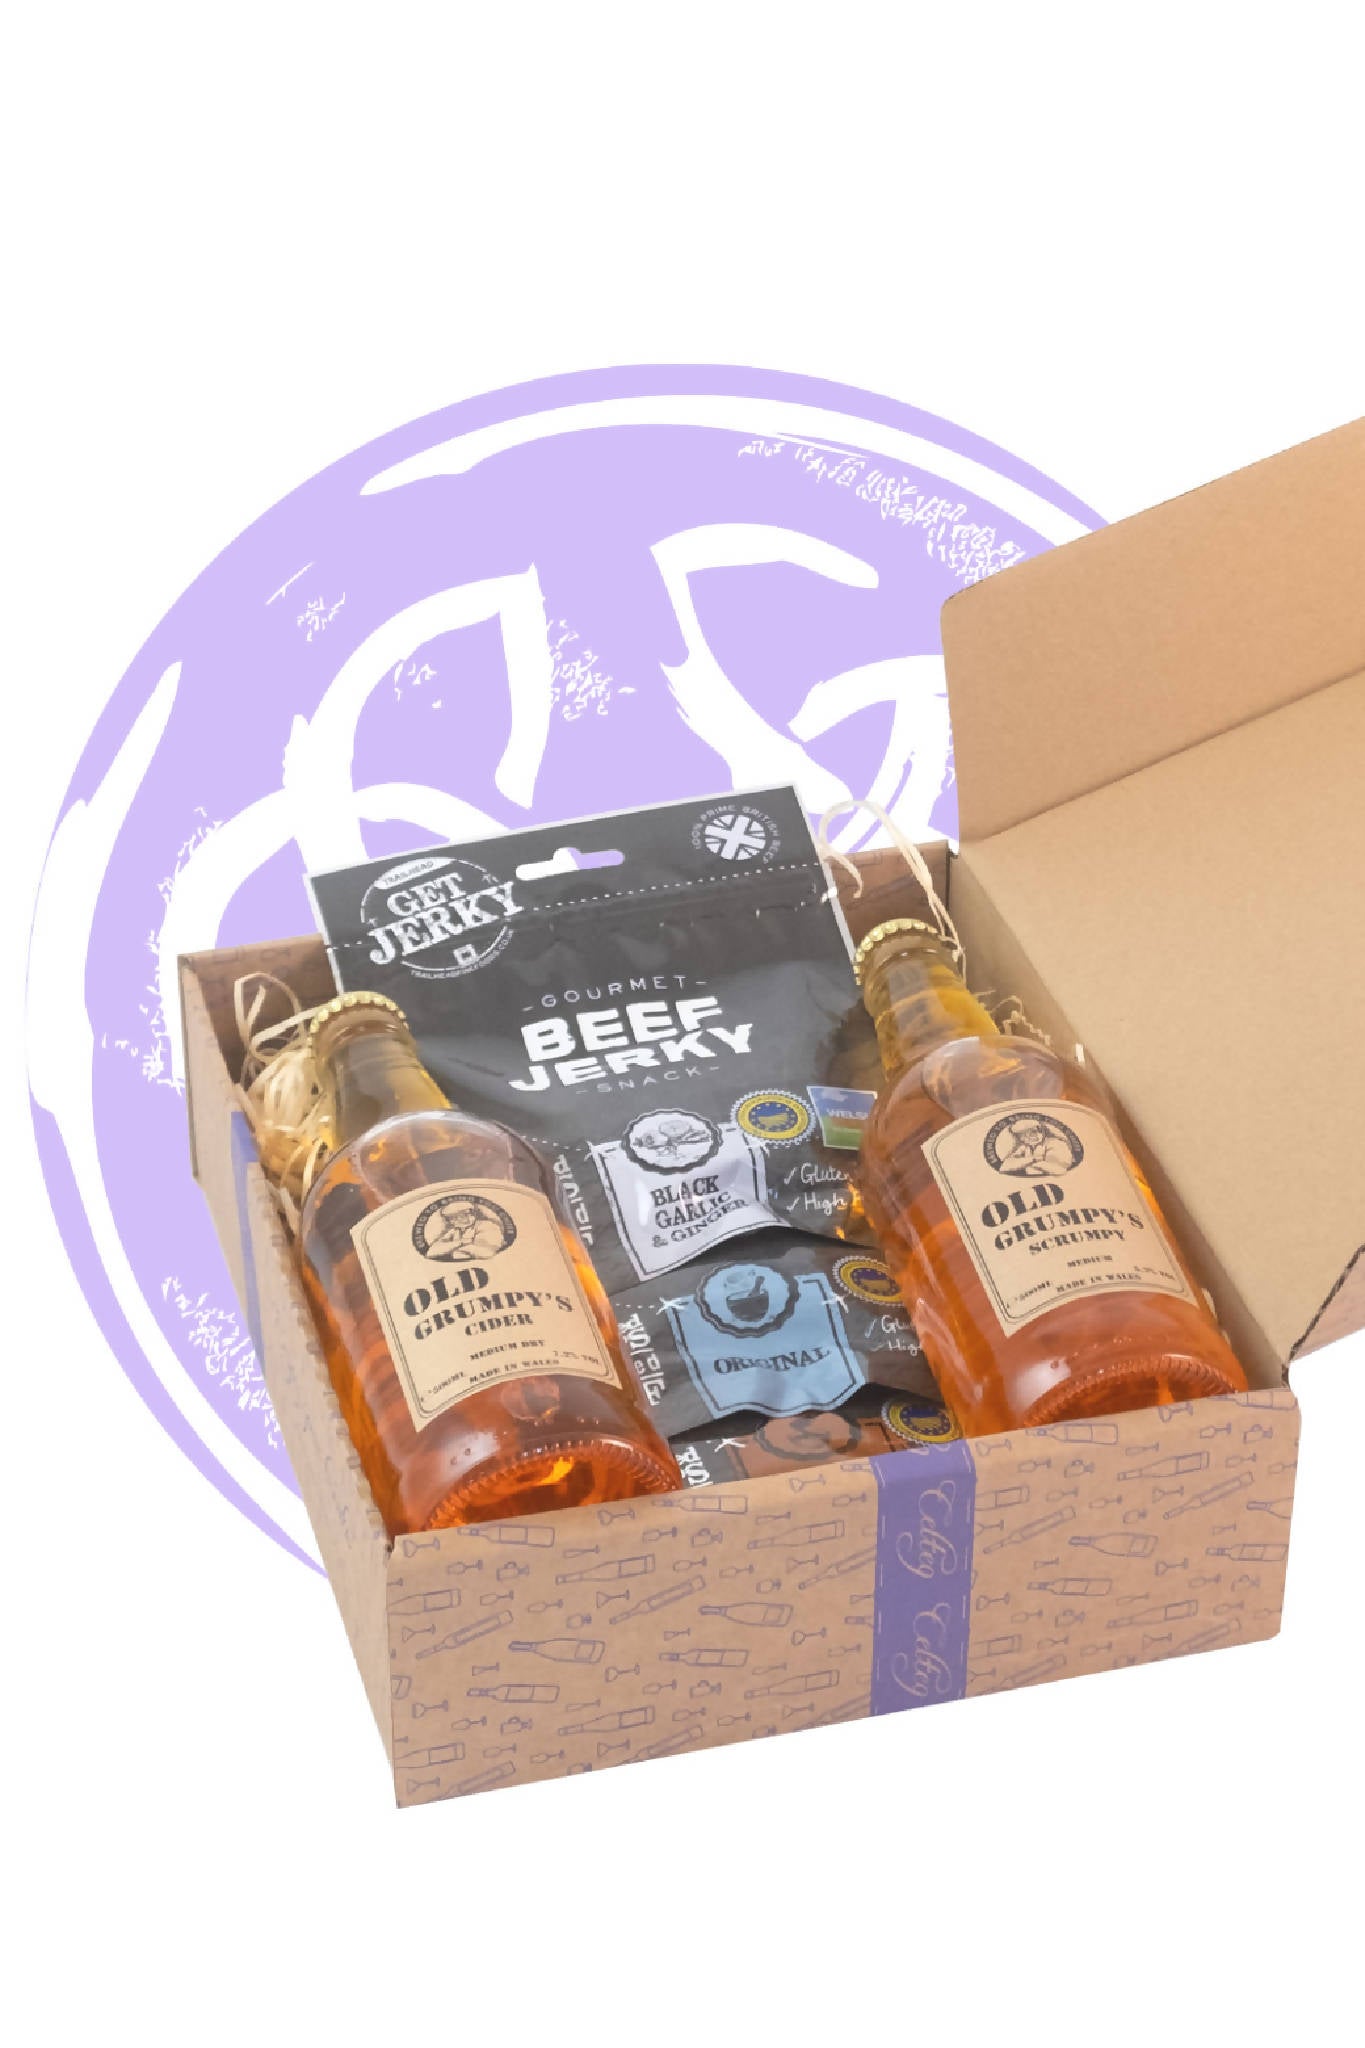 Old Grumpy’s Welsh Cider & Beef Jerky Gift Box